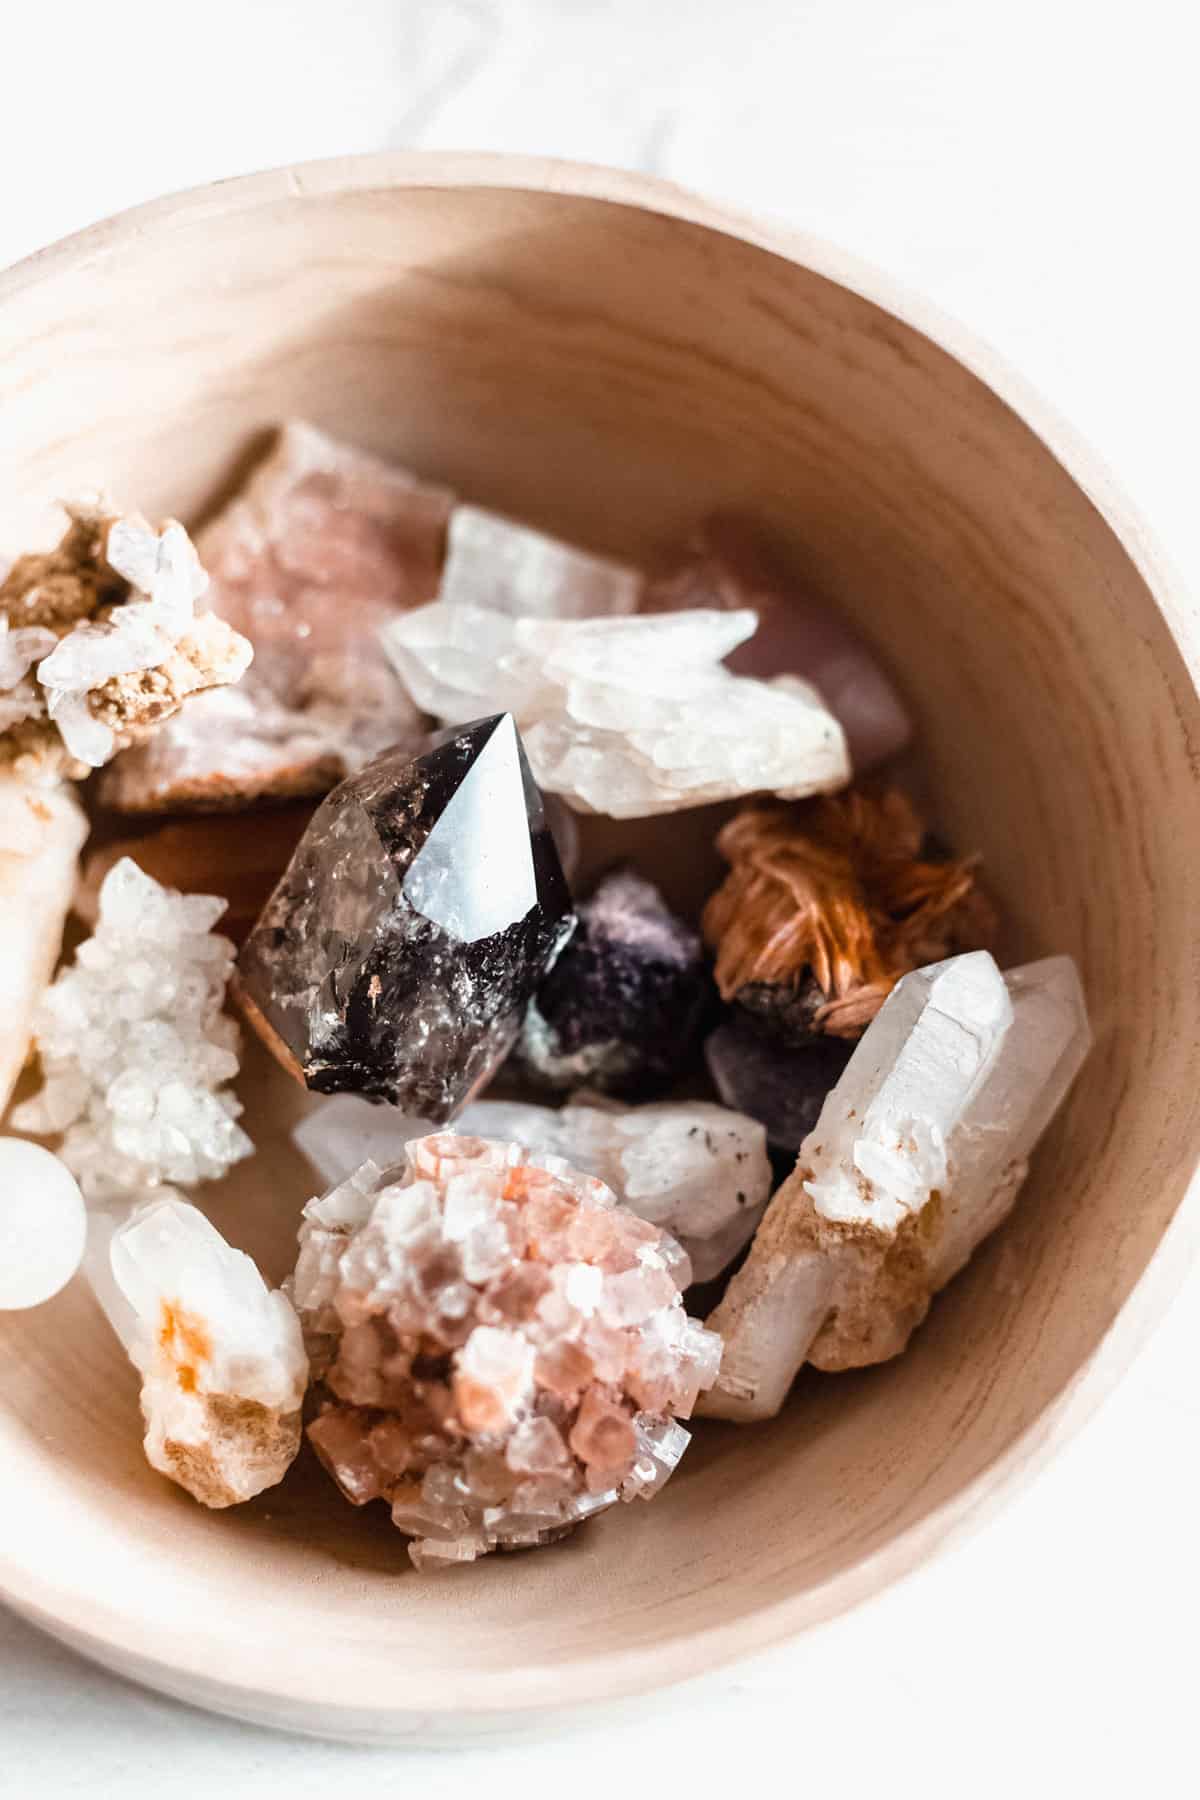 Top 12 healing crystals for every ailment.